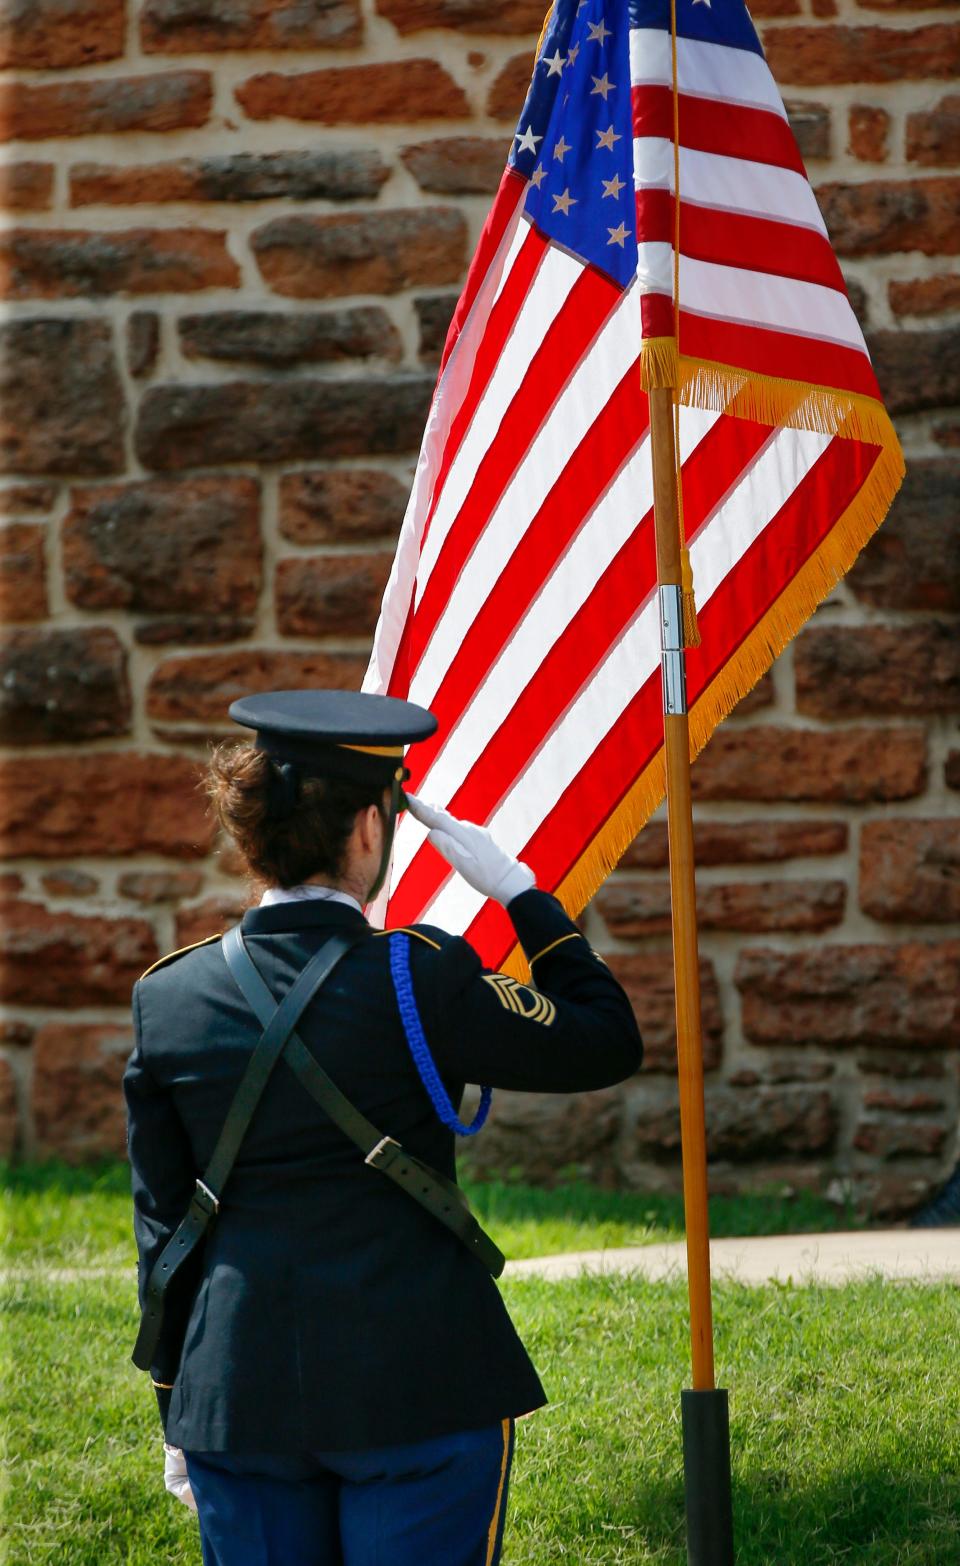 Master Sgt. Rebecca McGary, the non-commissioned officer in charge of the Governor's Honor Guard, salutes during the retiring of the colors at the annual Memorial Day ceremony at the 45th Infantry Division Museum in Oklahoma City, Monday, May 27, 2019.